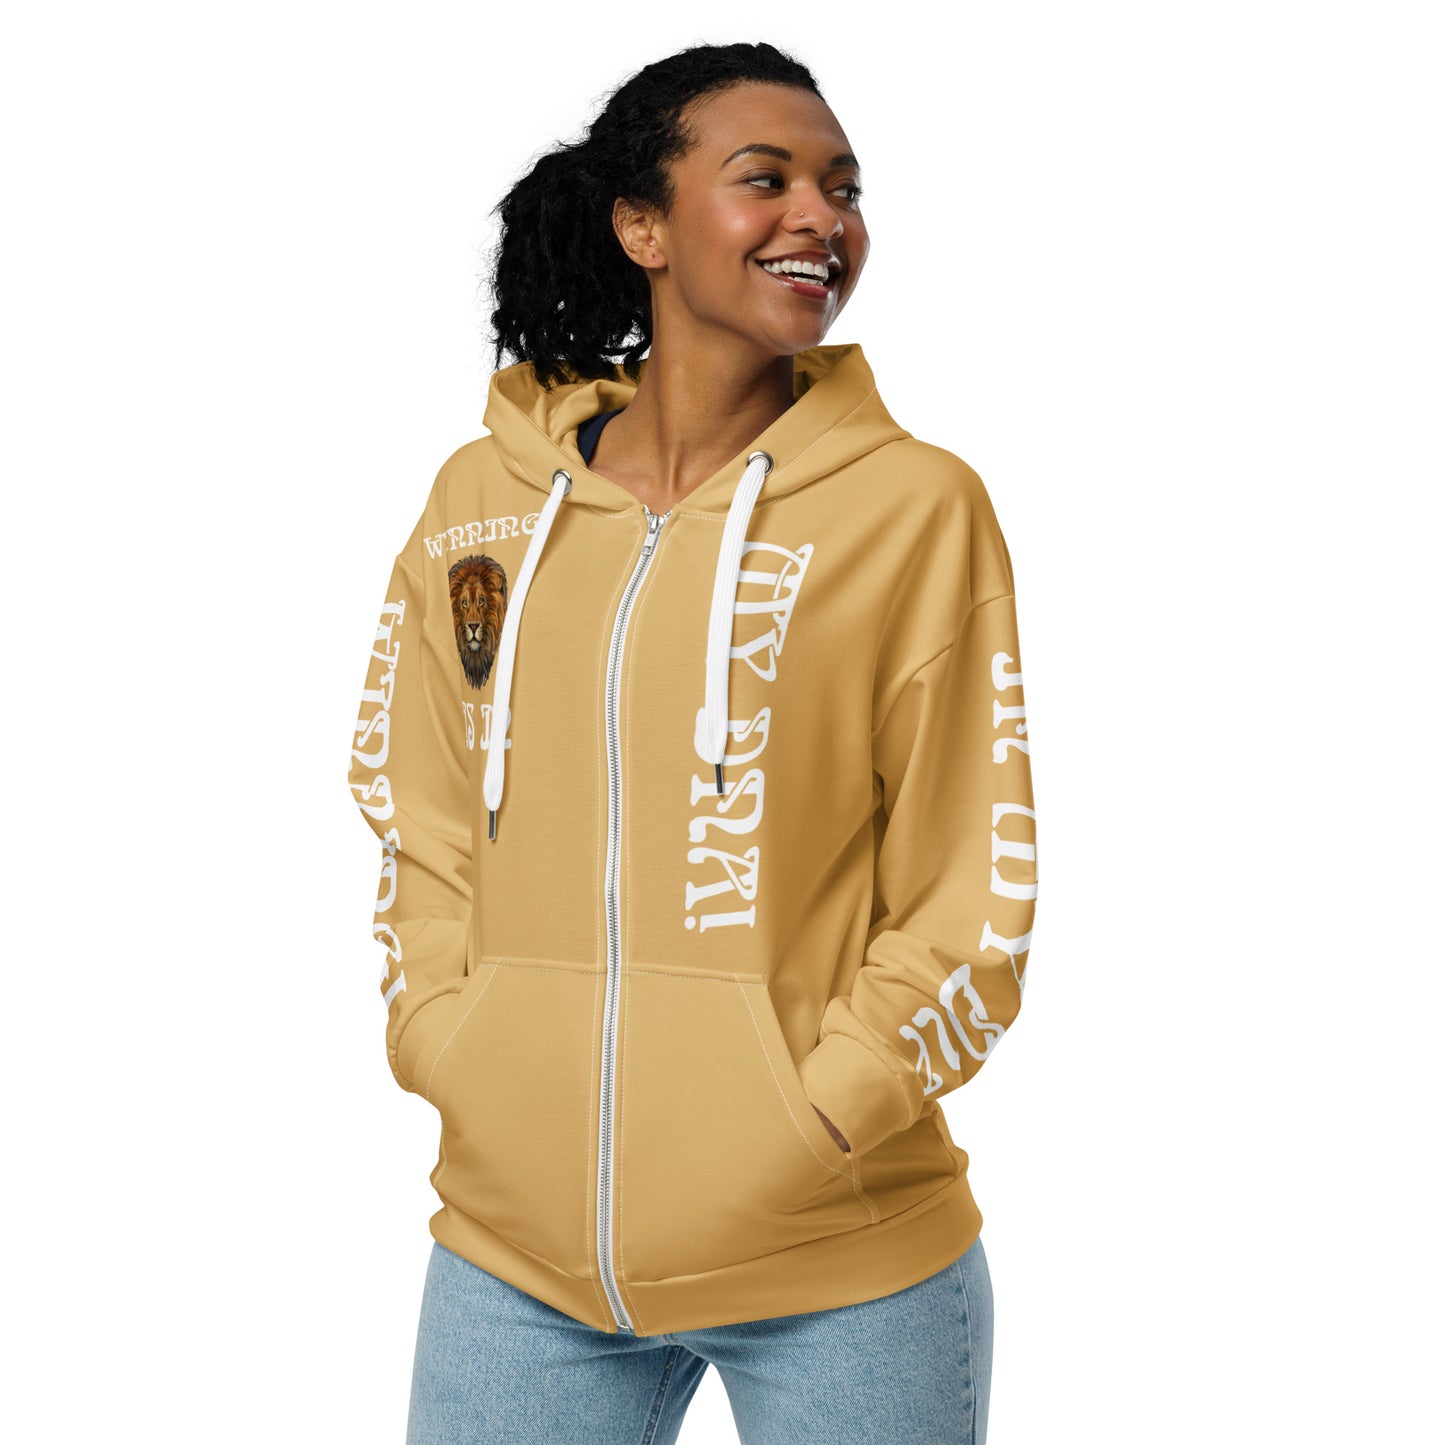 “WINNING IS IN MY DNA!”Fawn Unisex Zip Hoodie W/White Font